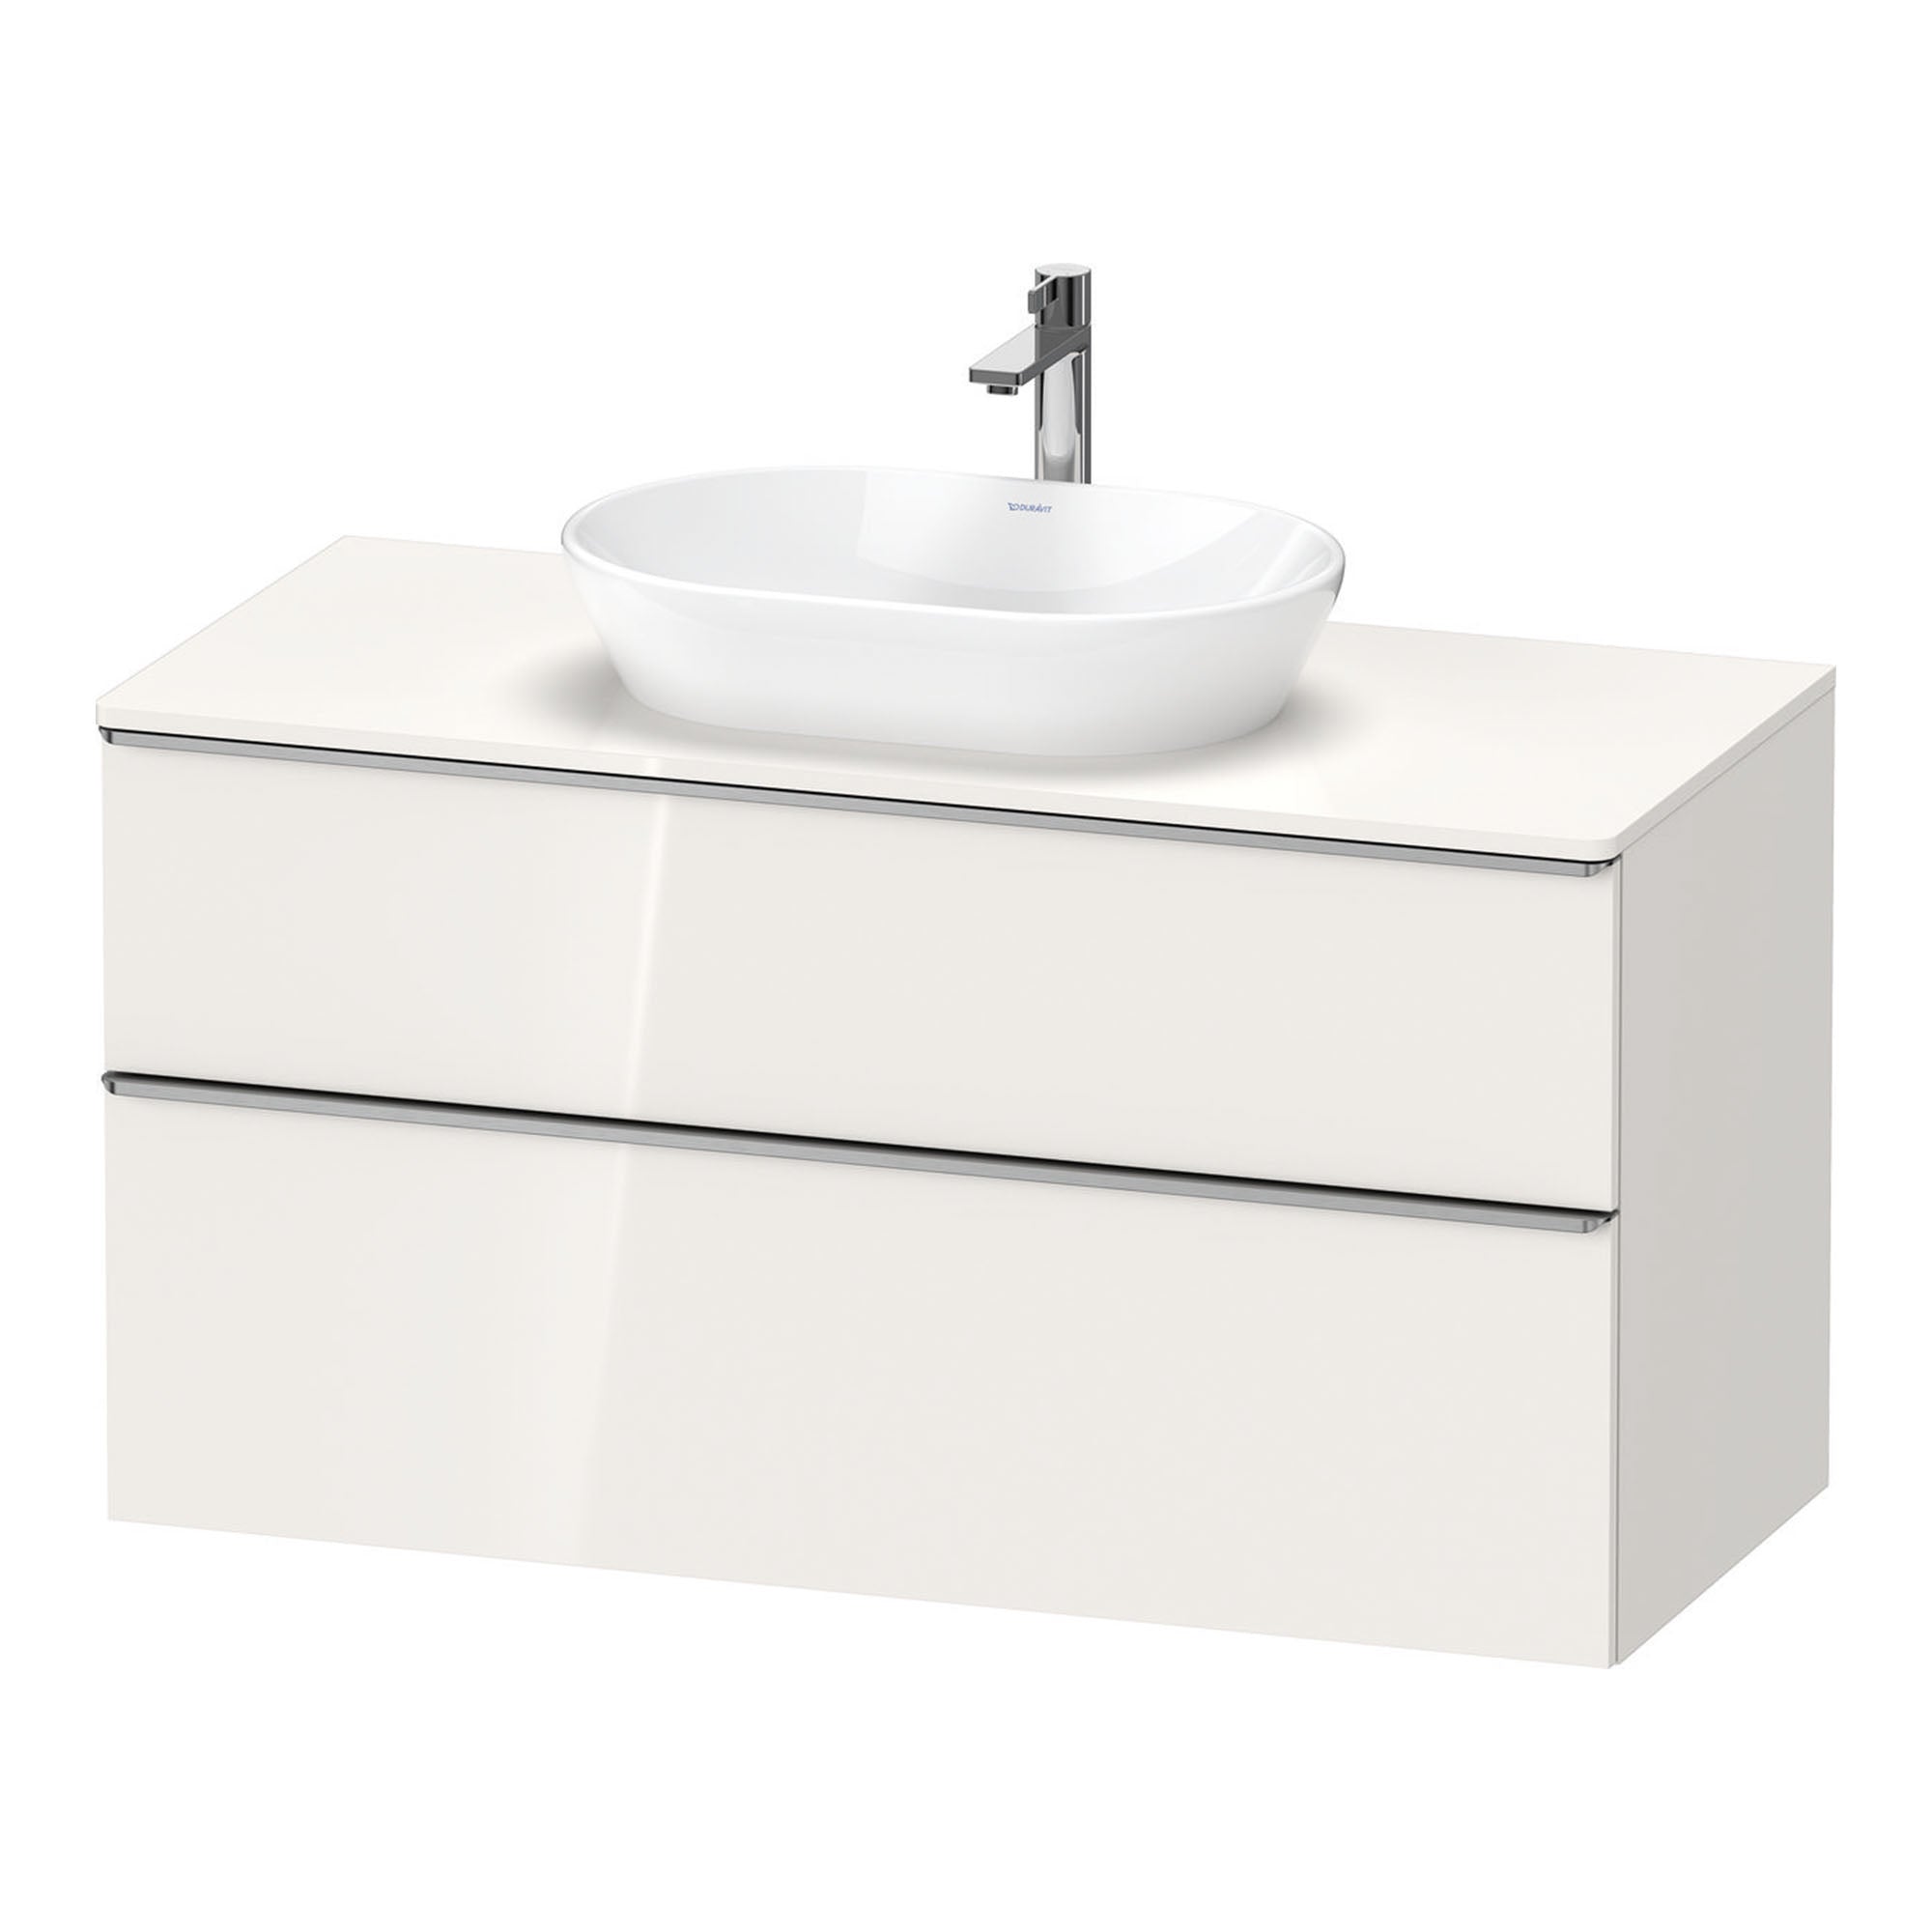 duravit d-neo 1200 wall mounted vanity unit with worktop white gloss stainless steel handles